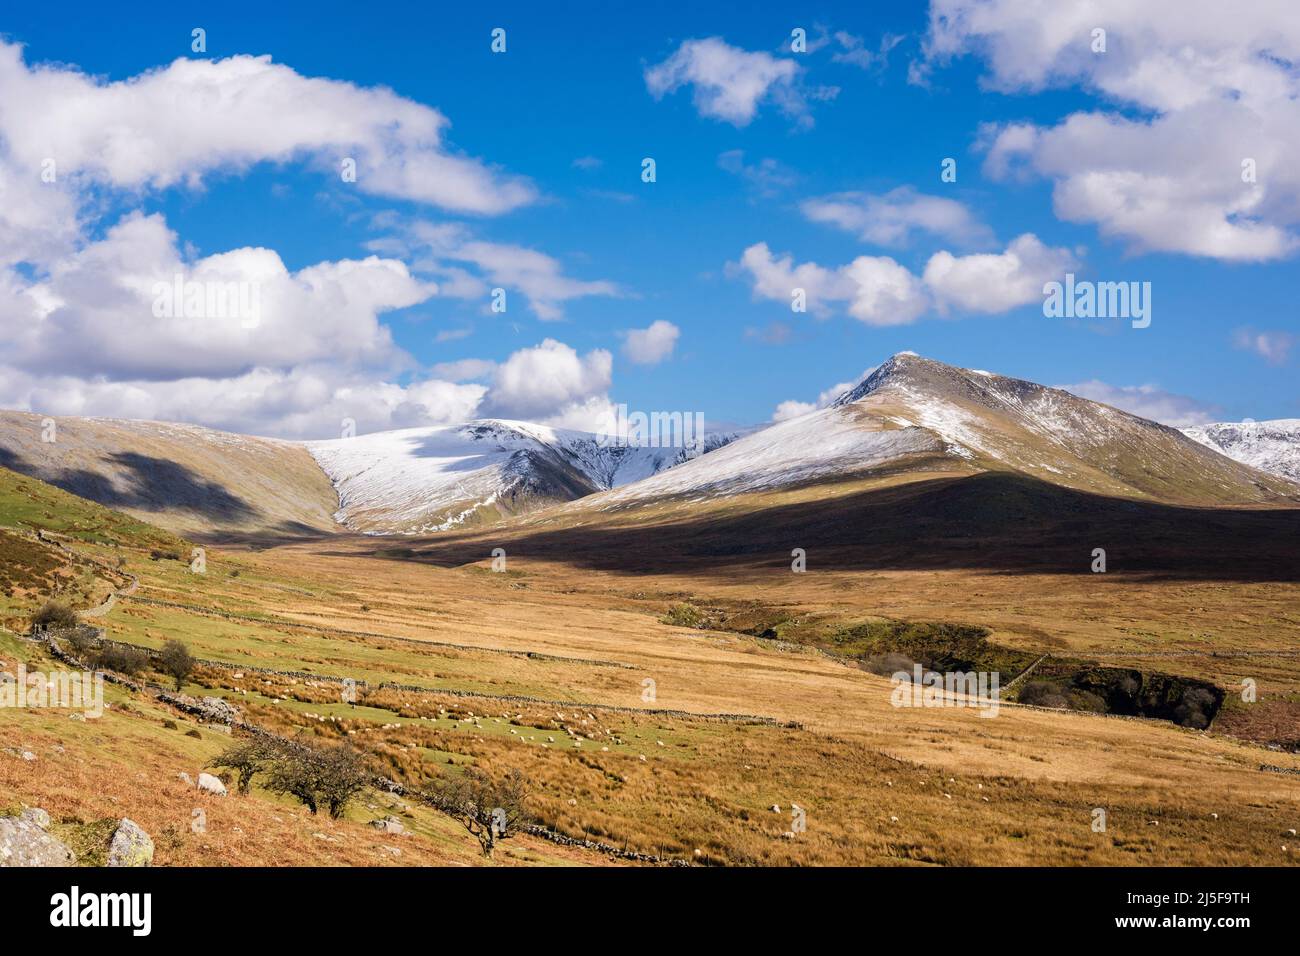 Snow capped Carneddau mountains with sheep grazing in valley in Snowdonia National Park. Bethesda, Gwynedd, north Wales, UK, Britain Stock Photo